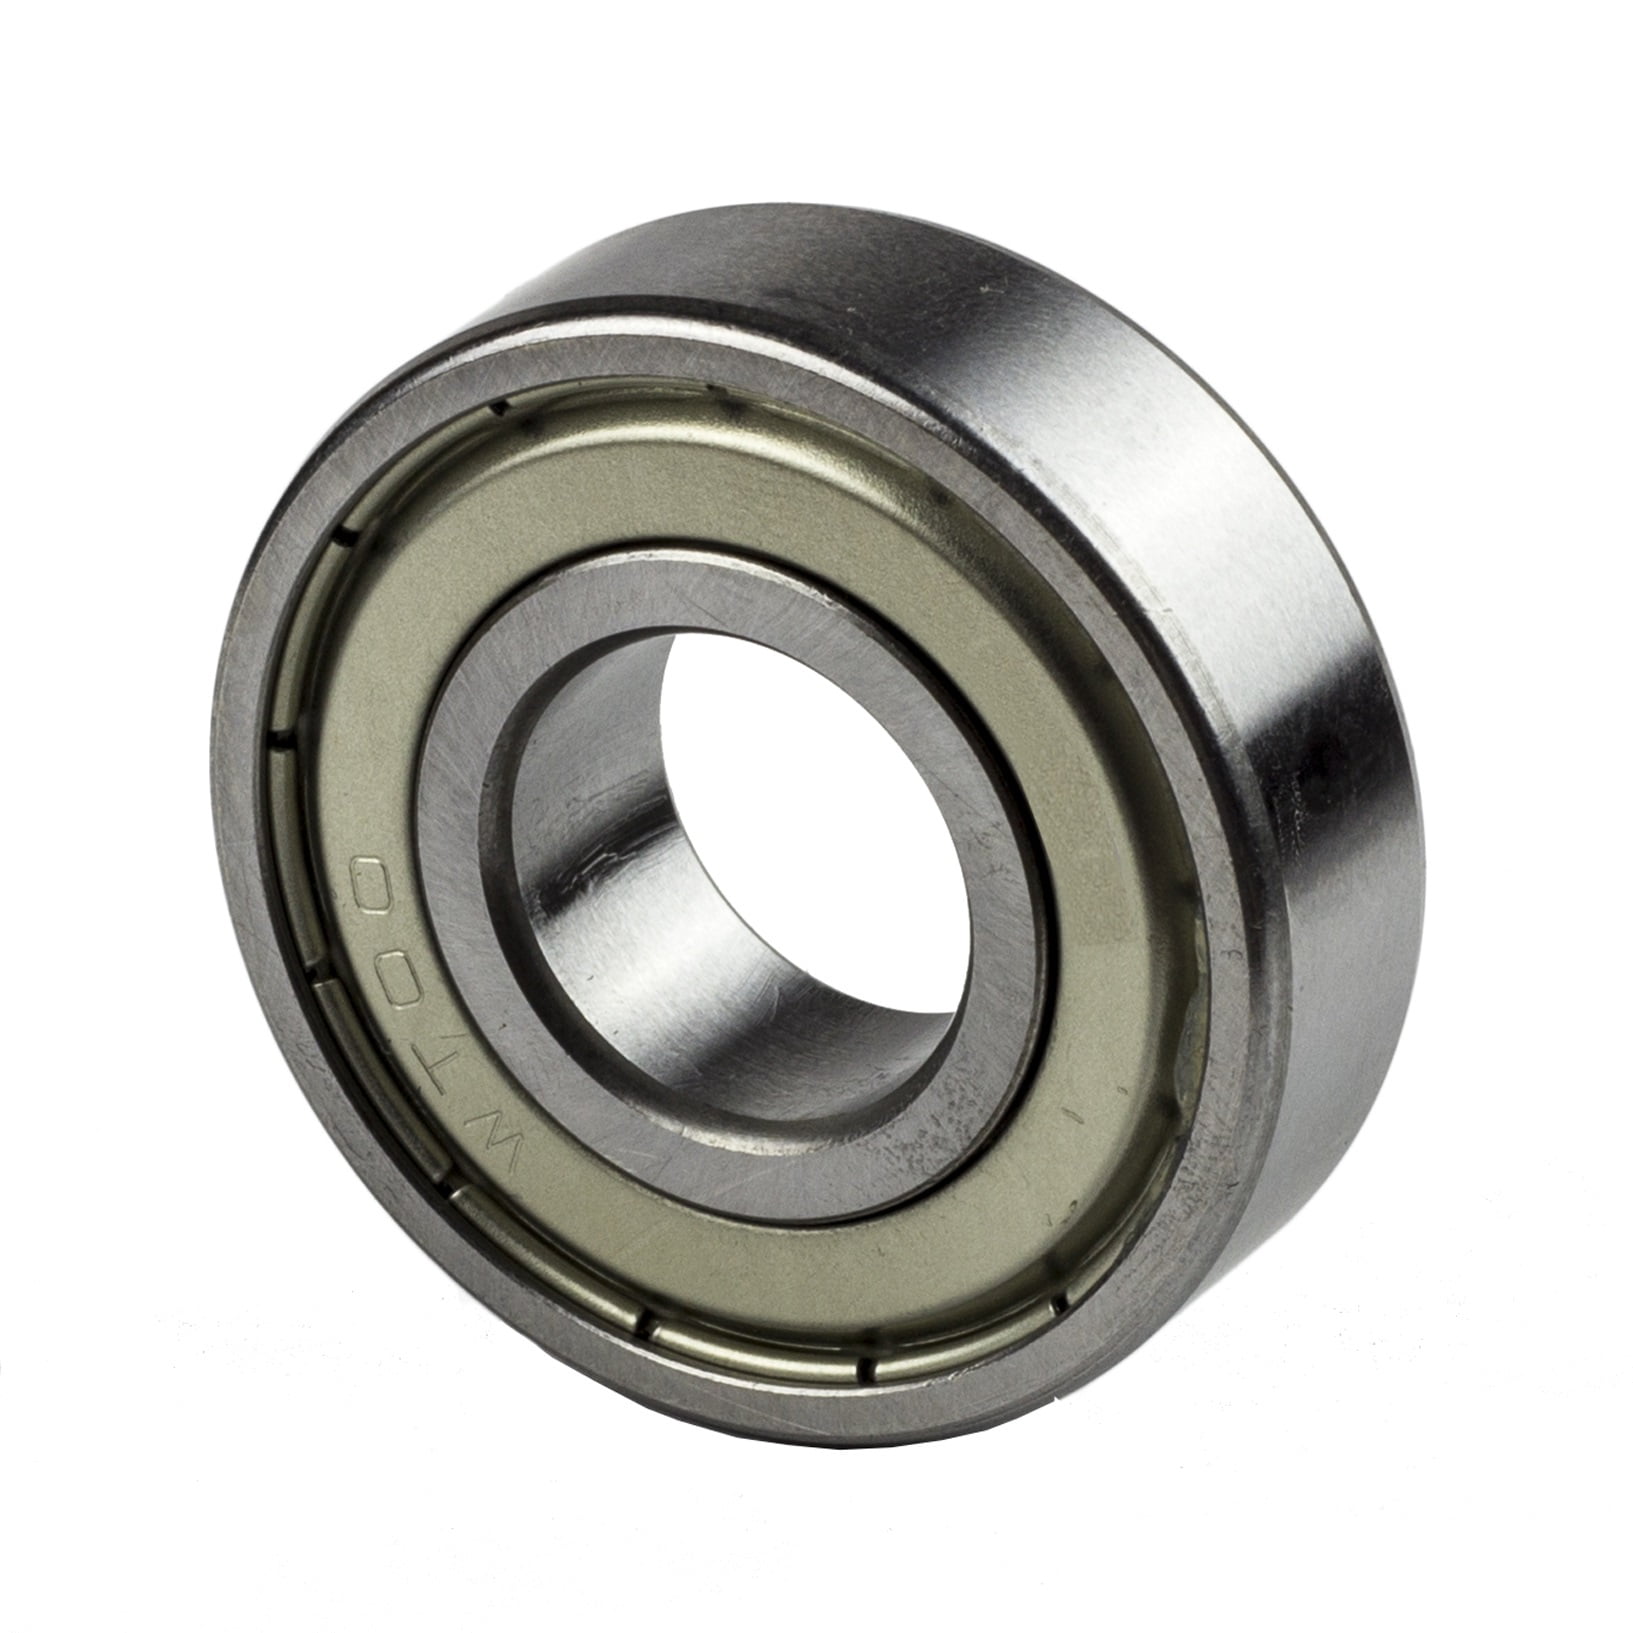 1x 6203-ZZ Ball Bearing 17mm x 40mm x 12mm Double Shielded Seal  w/ Snap Ring 